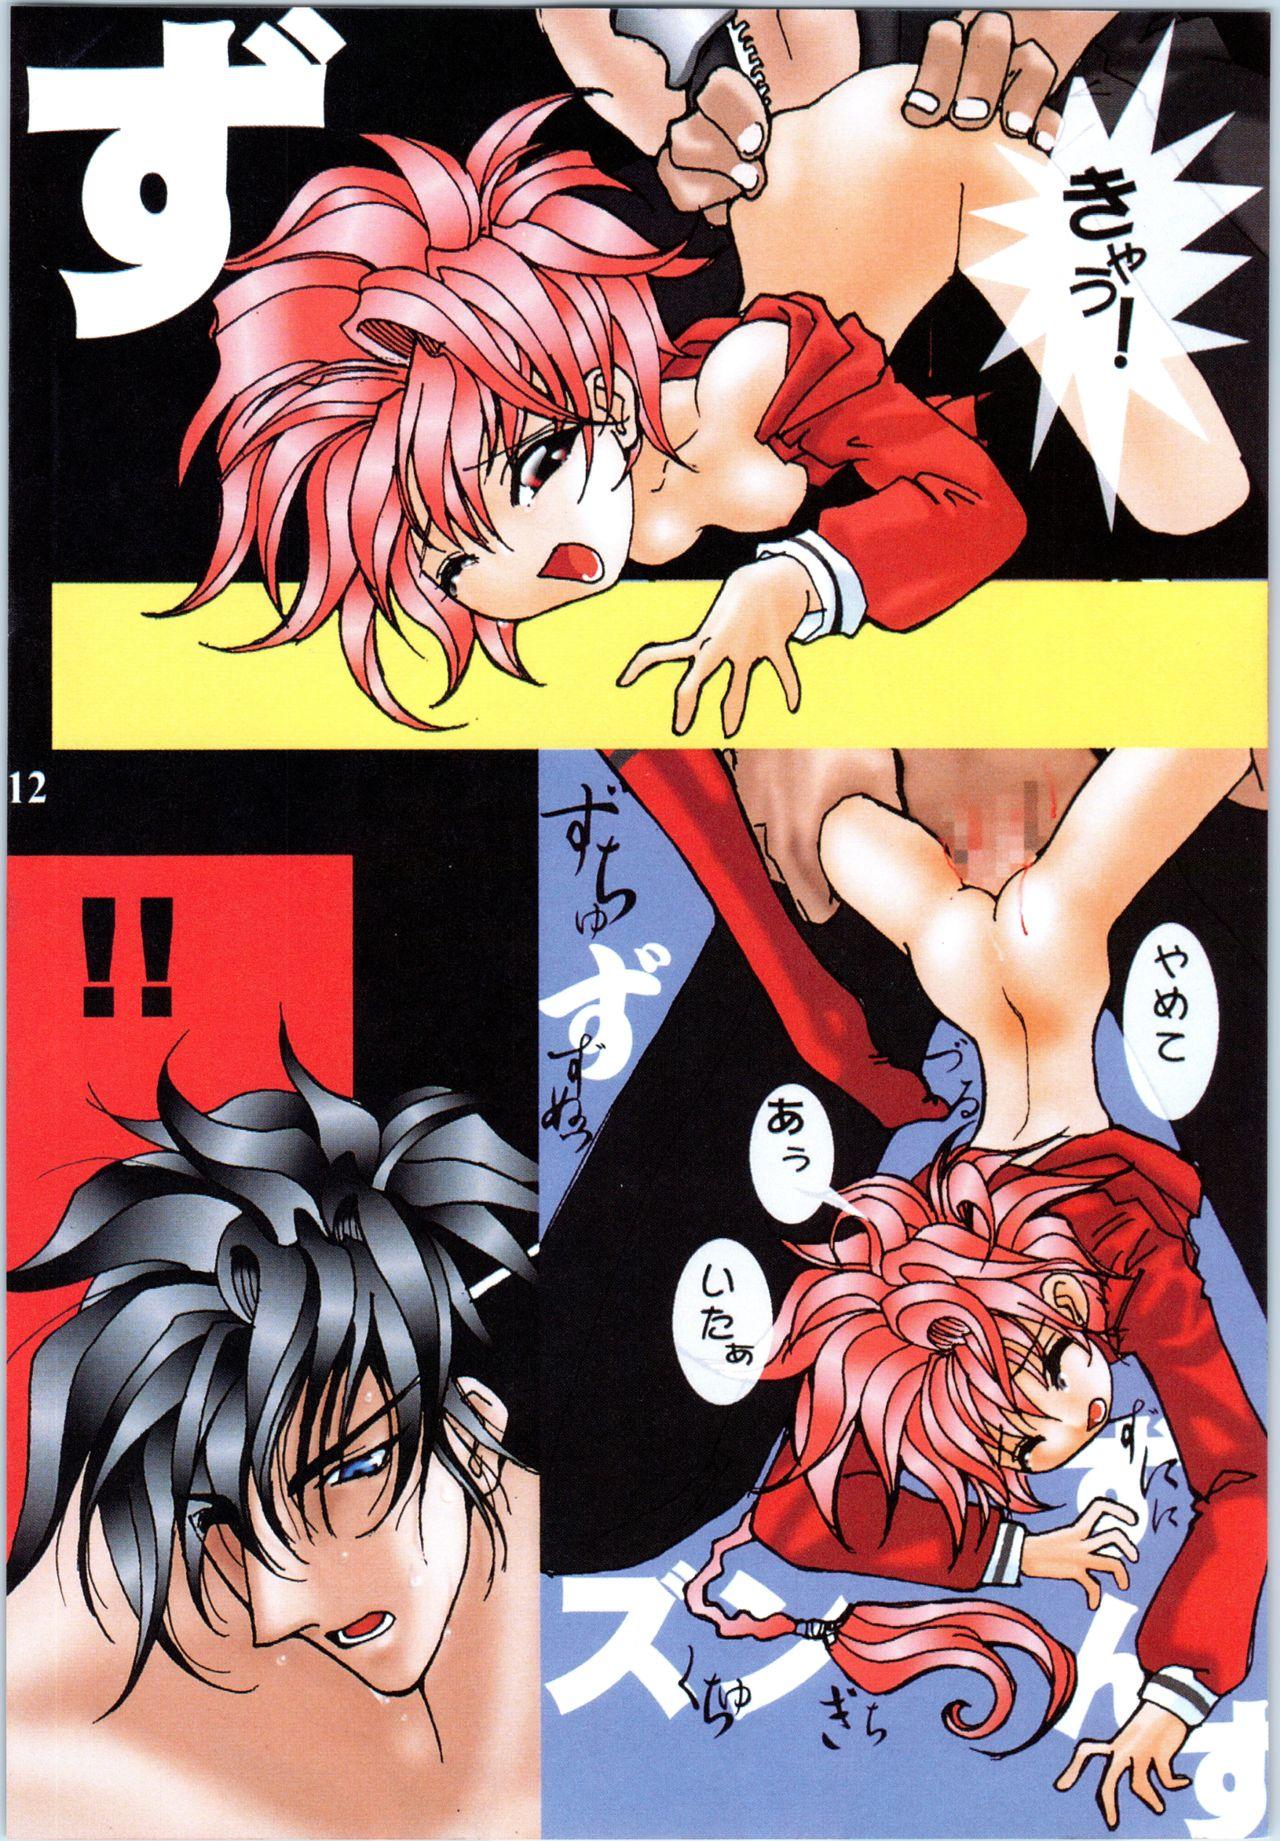 Porn Star Cool Breaker - Magic knight rayearth Swallowing - Page 11